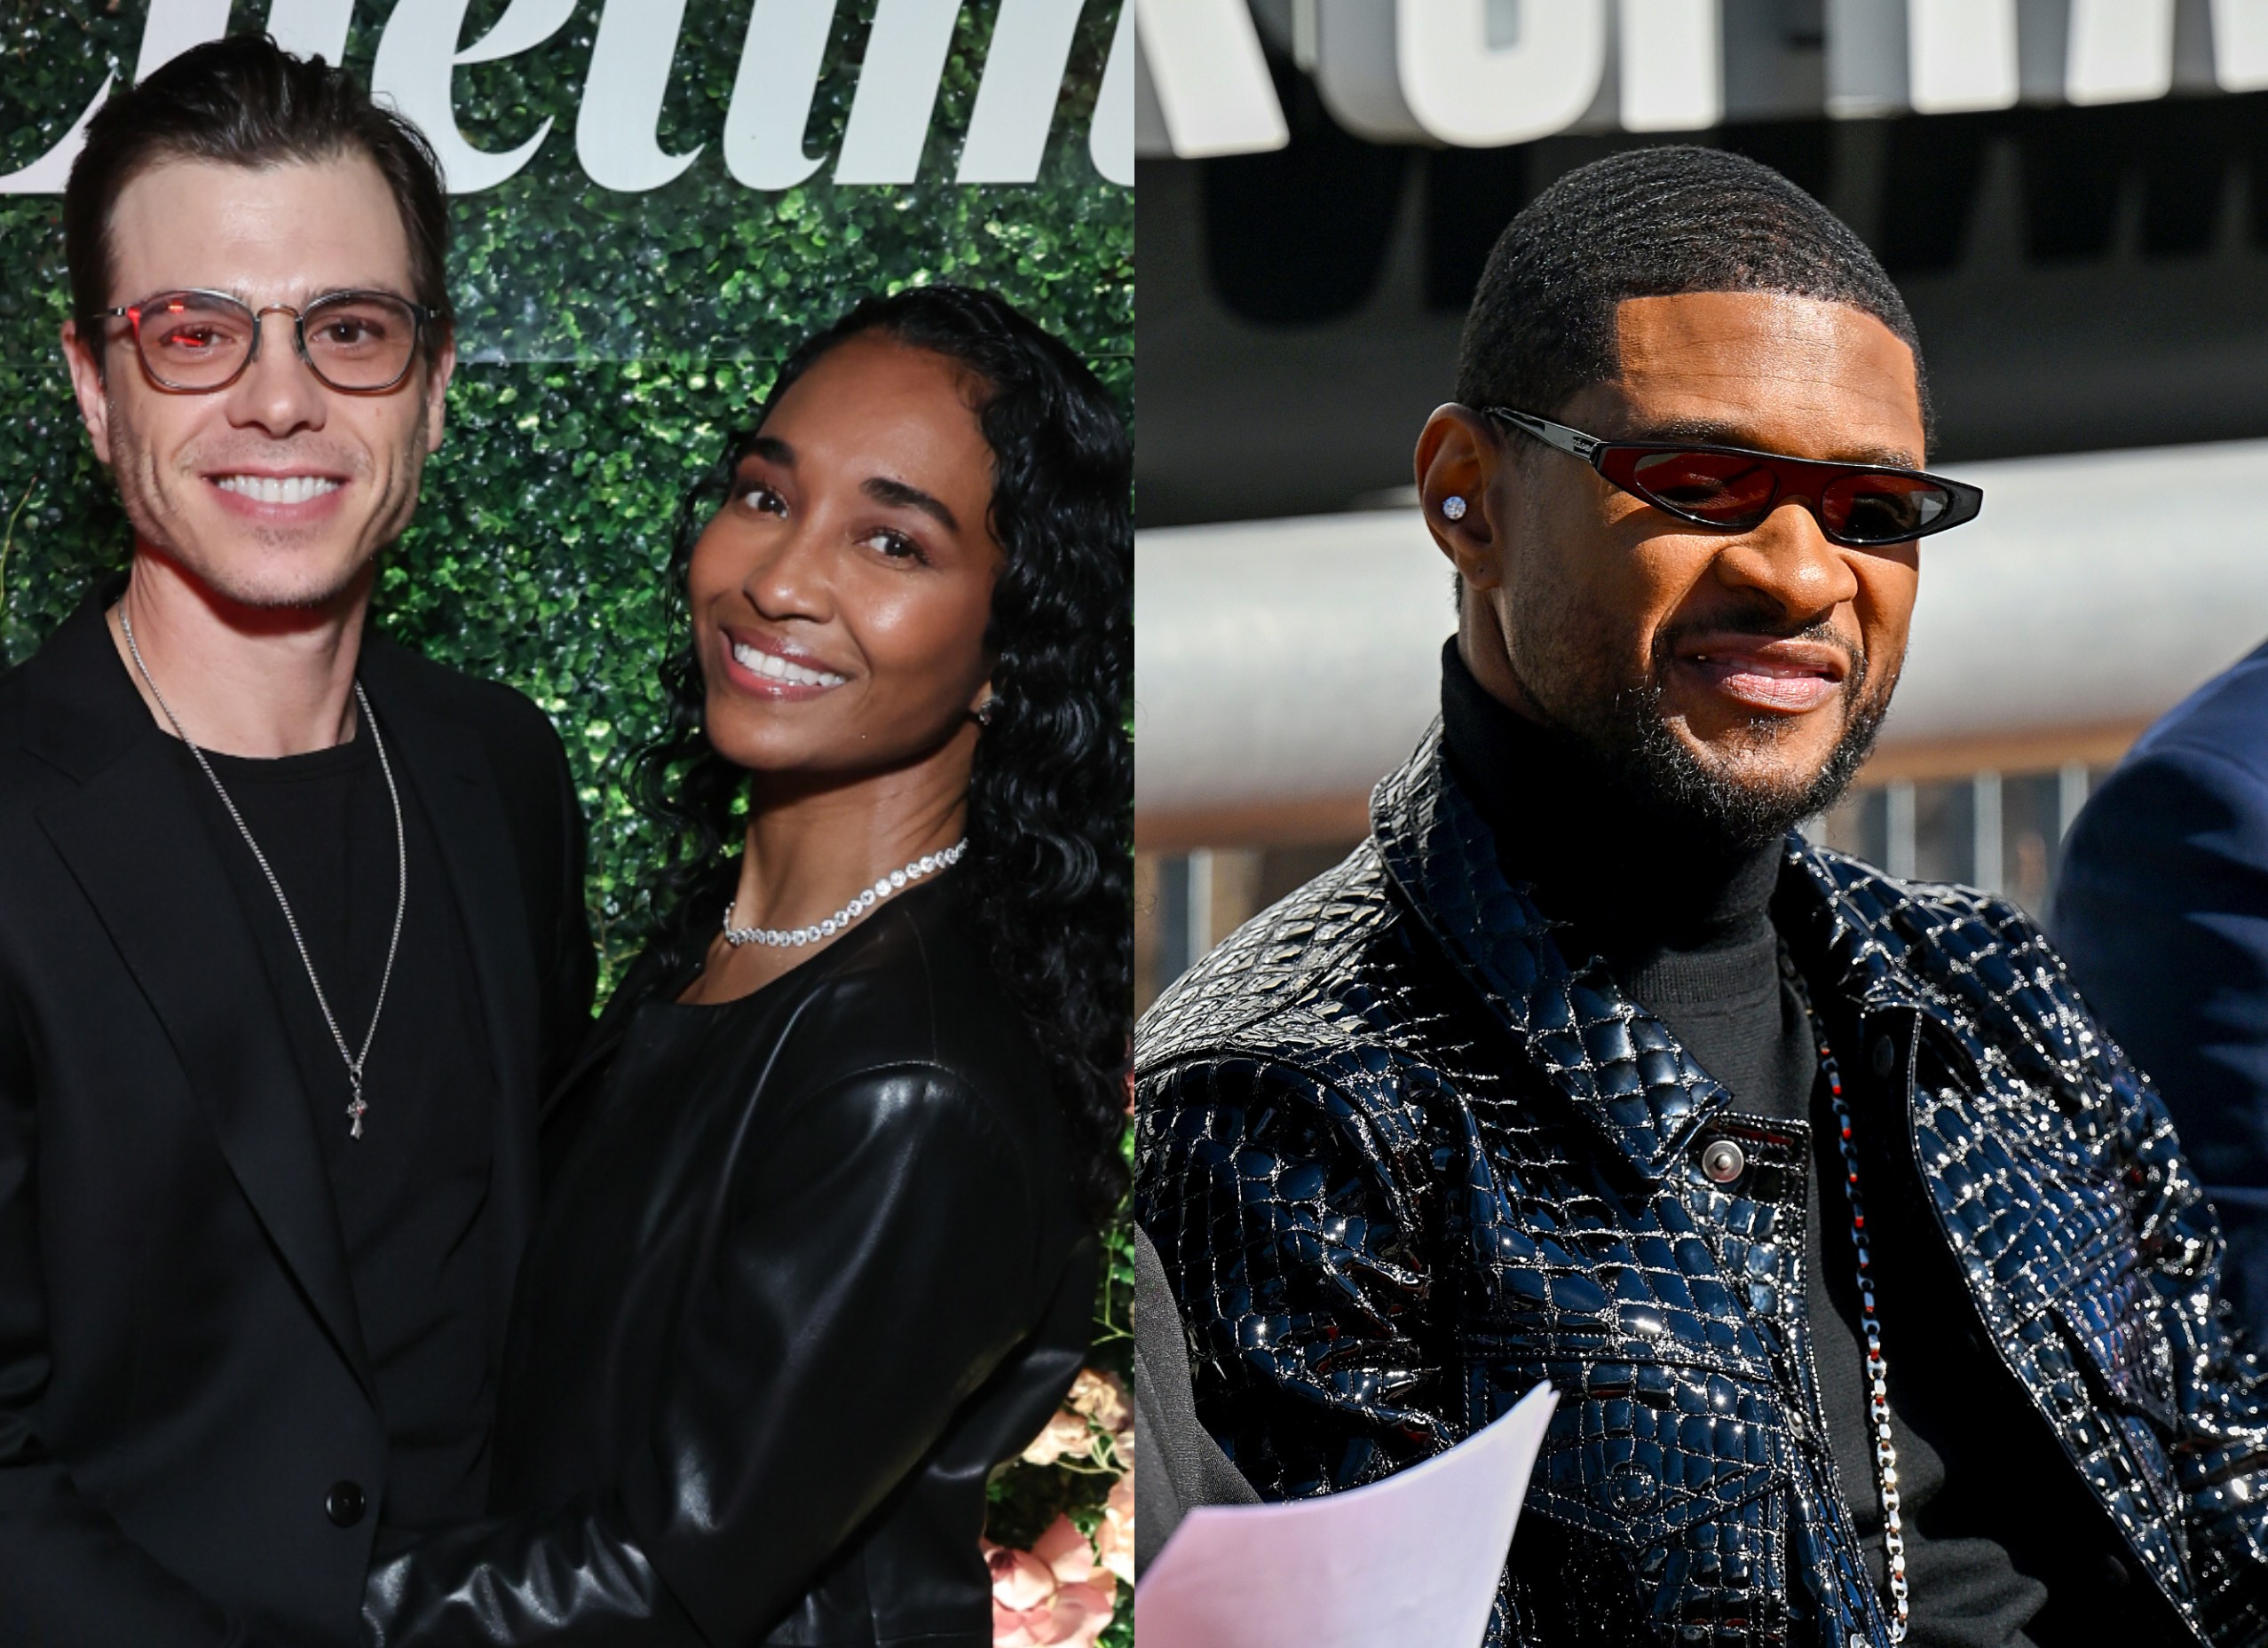 Chilli Curves Confessions About Usher’s Post-Proposal Heartbreak To Focus On Romantic Getaway With New Boo Matthew Lawrence